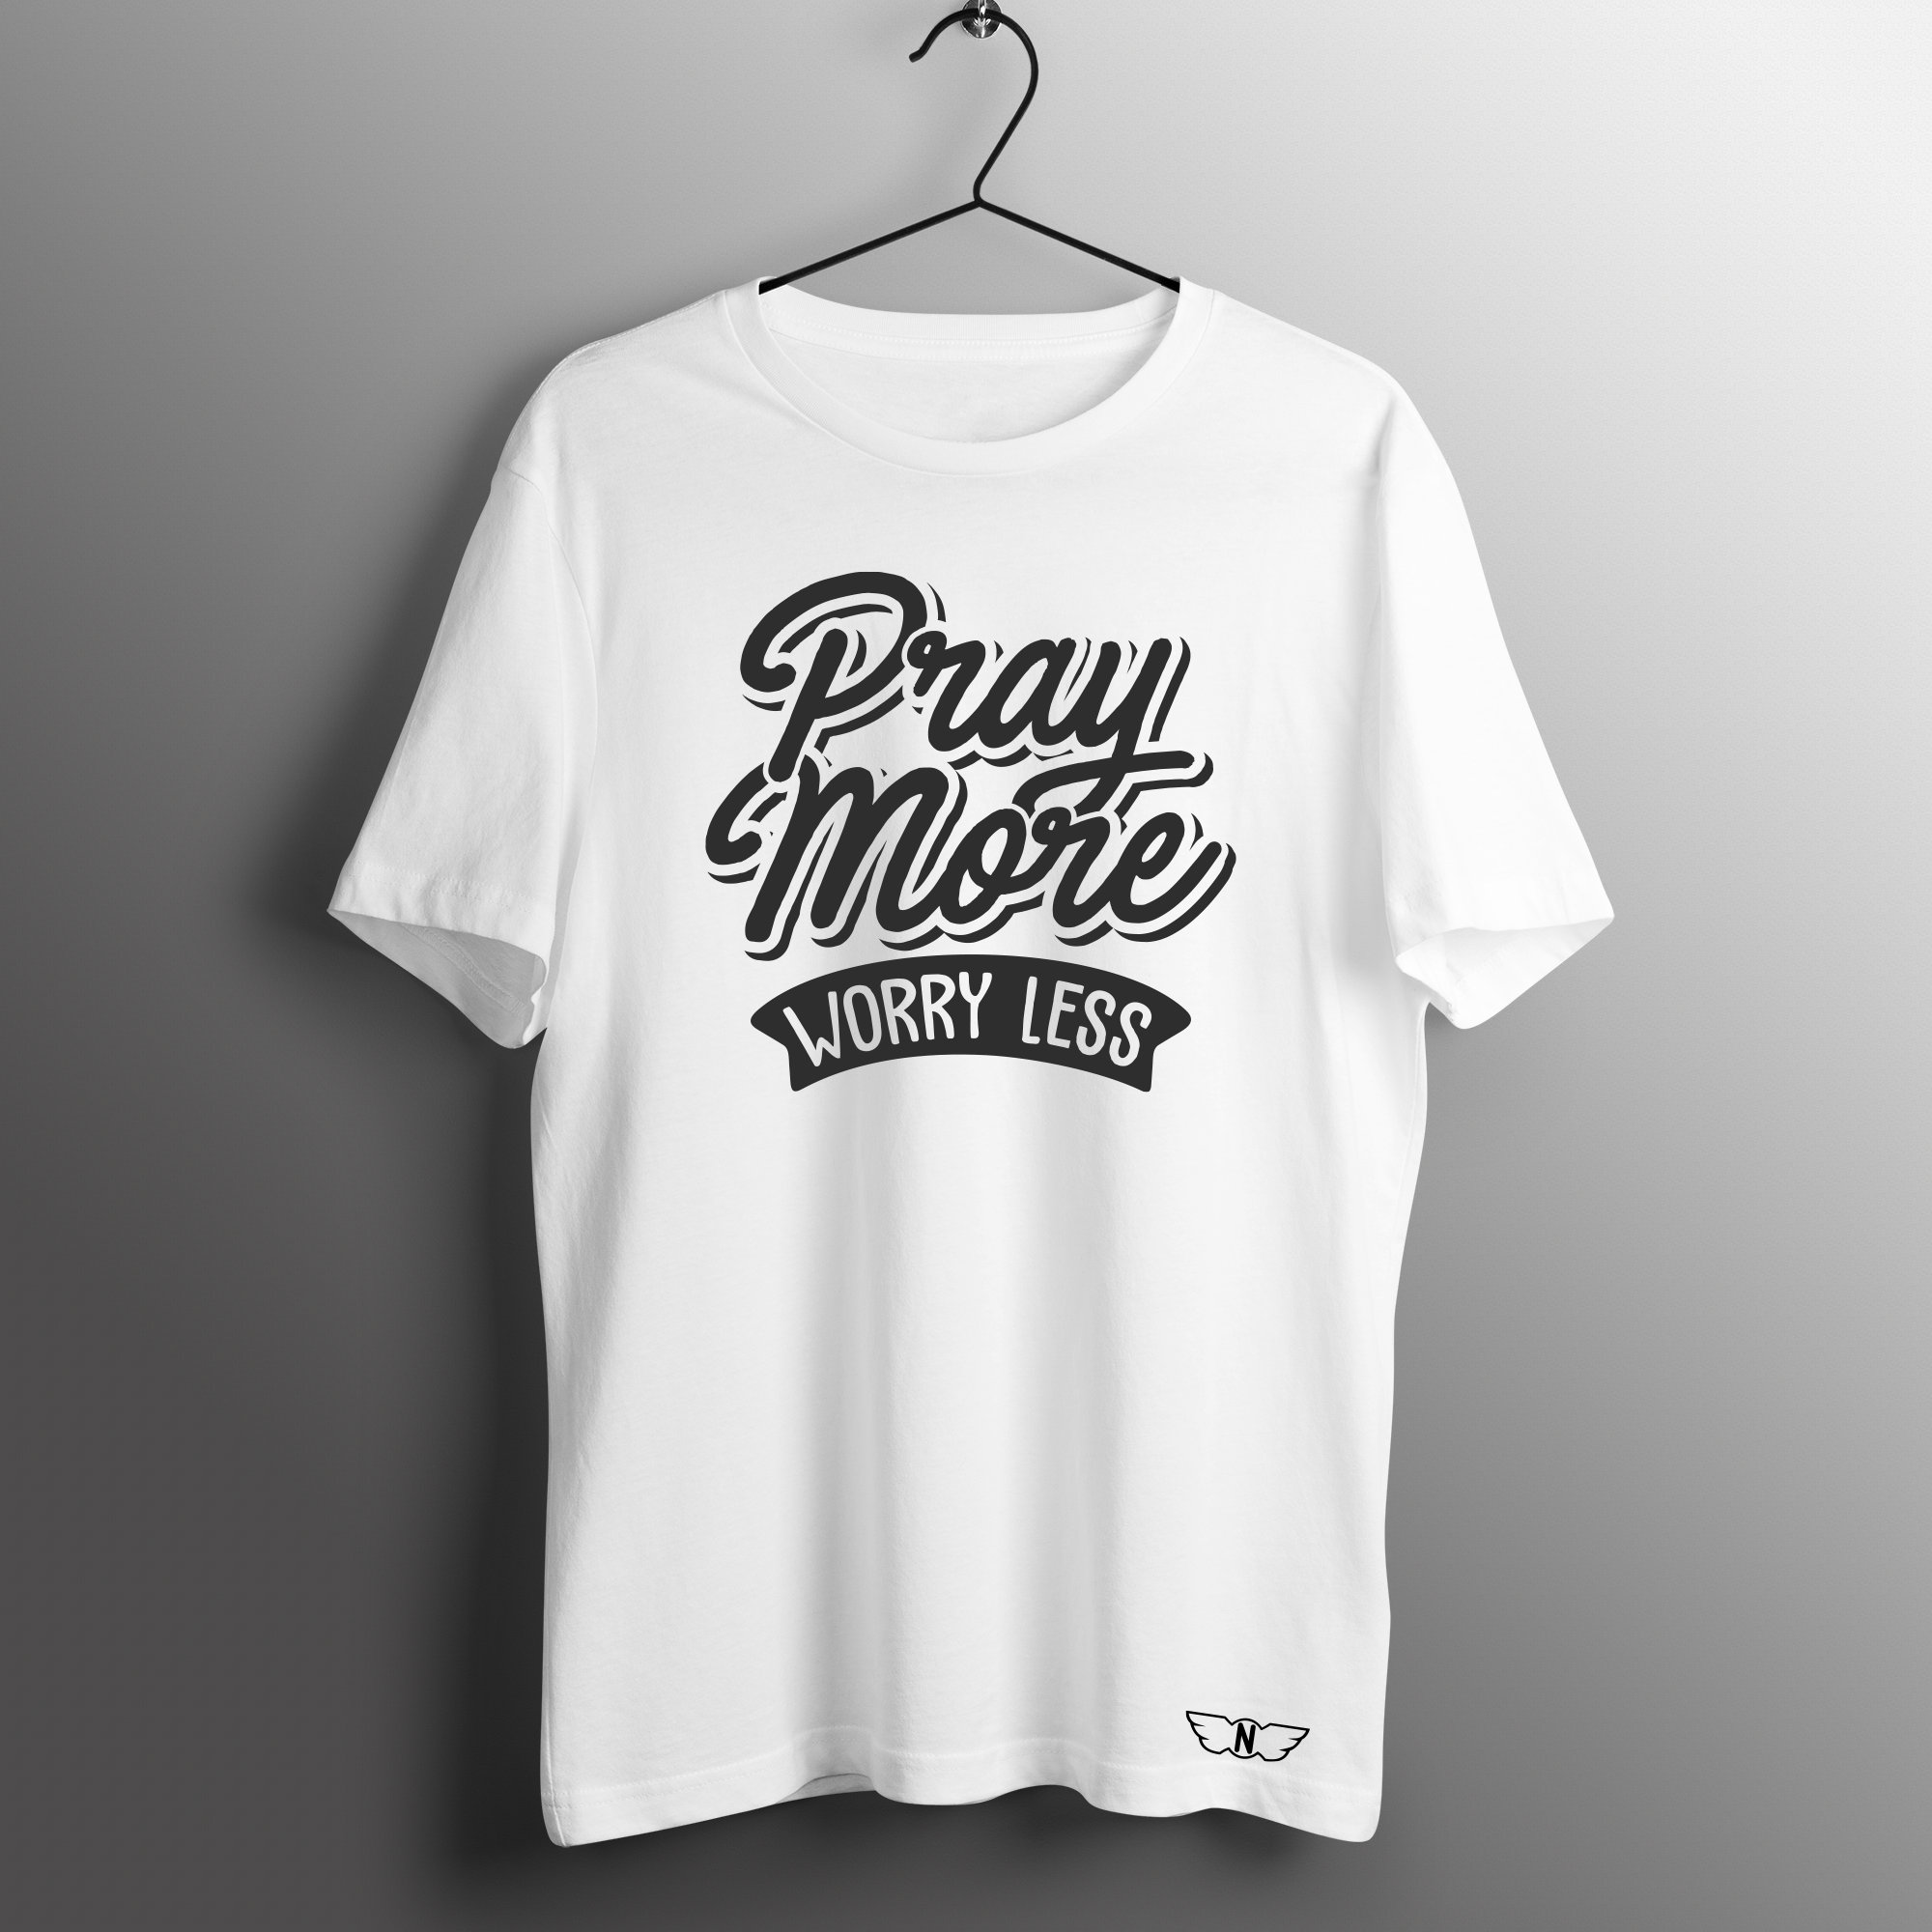 Pray None Stop Shirt- Adult Mens Womens Unisex Shirt Pray More worry less Pray all the time tshirt Dont worry just Pray tee